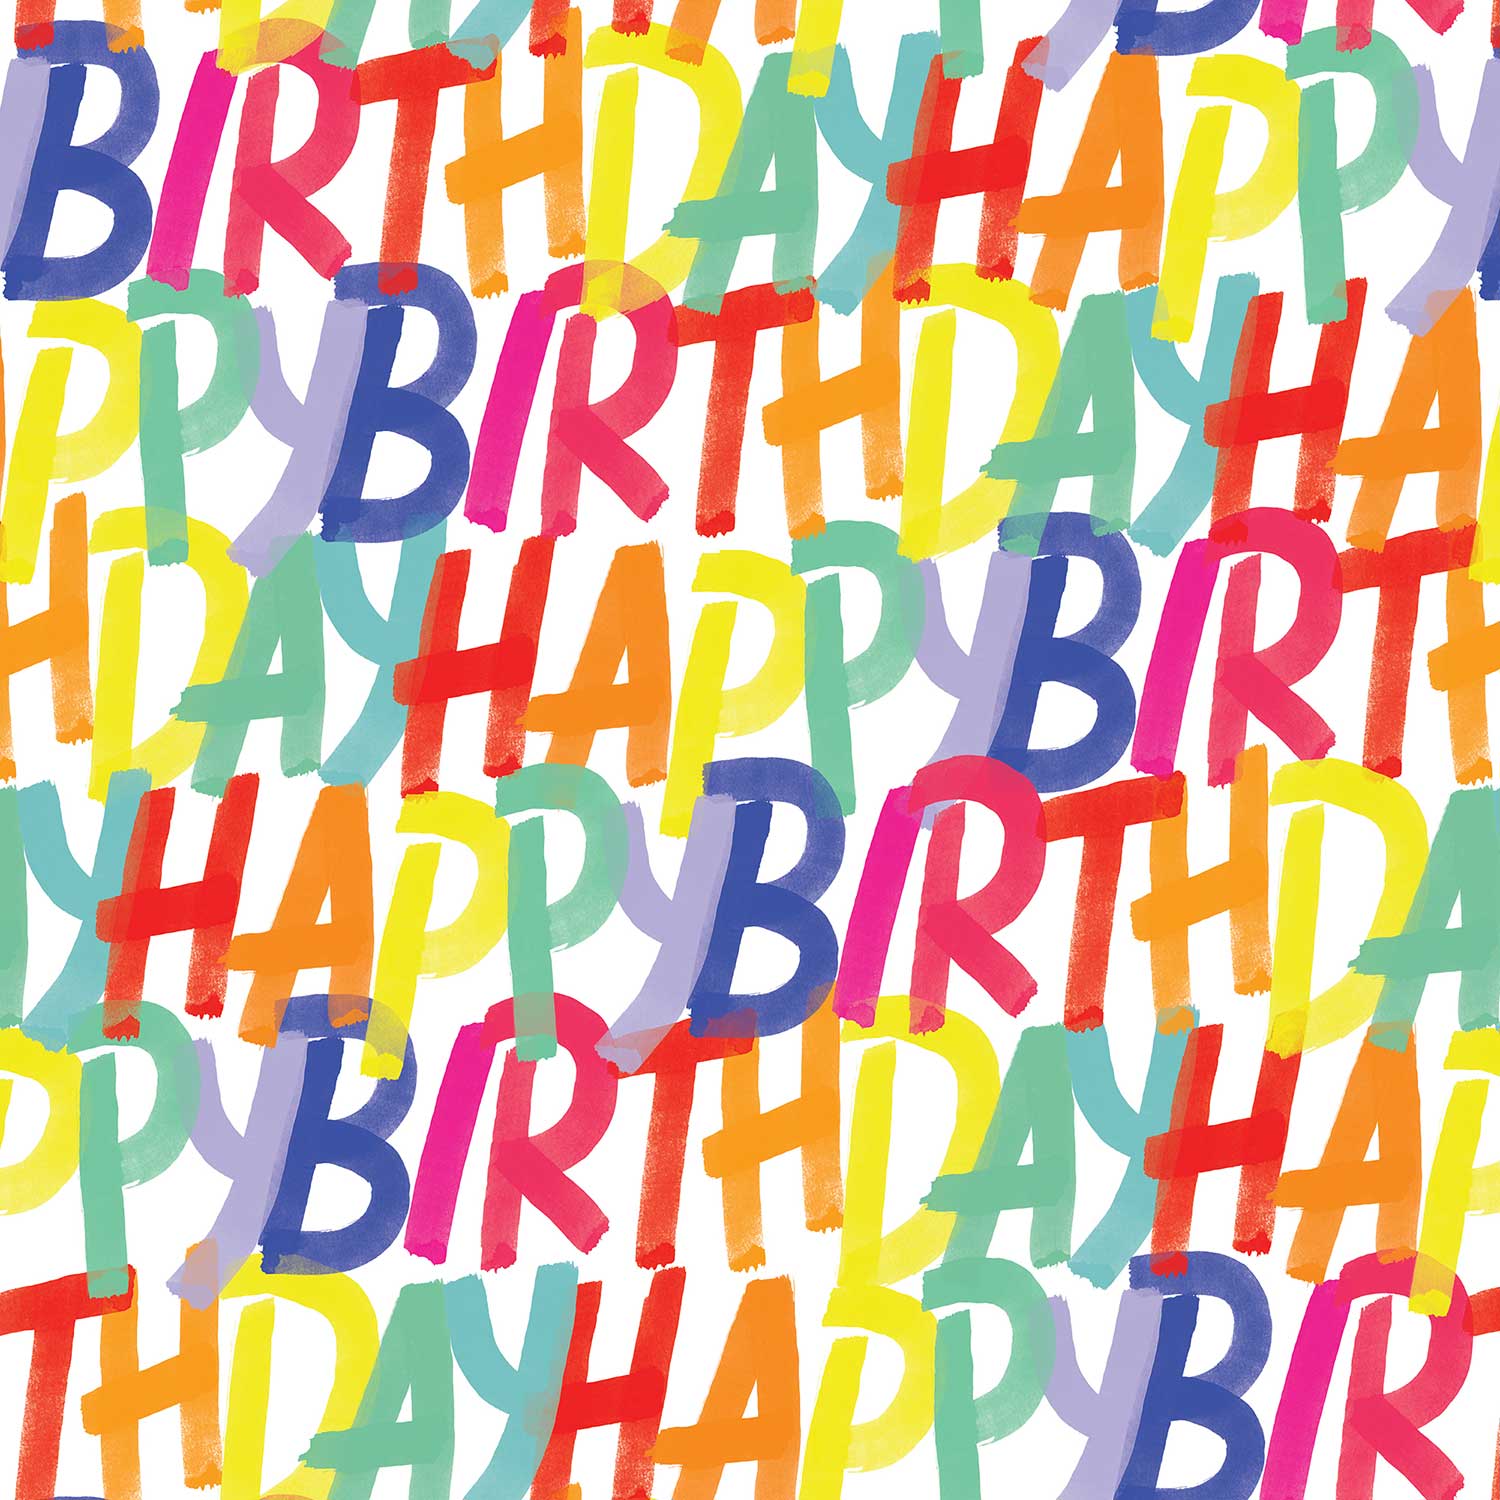 Happy Birthday Theme Gift Wrap- Pack of 10